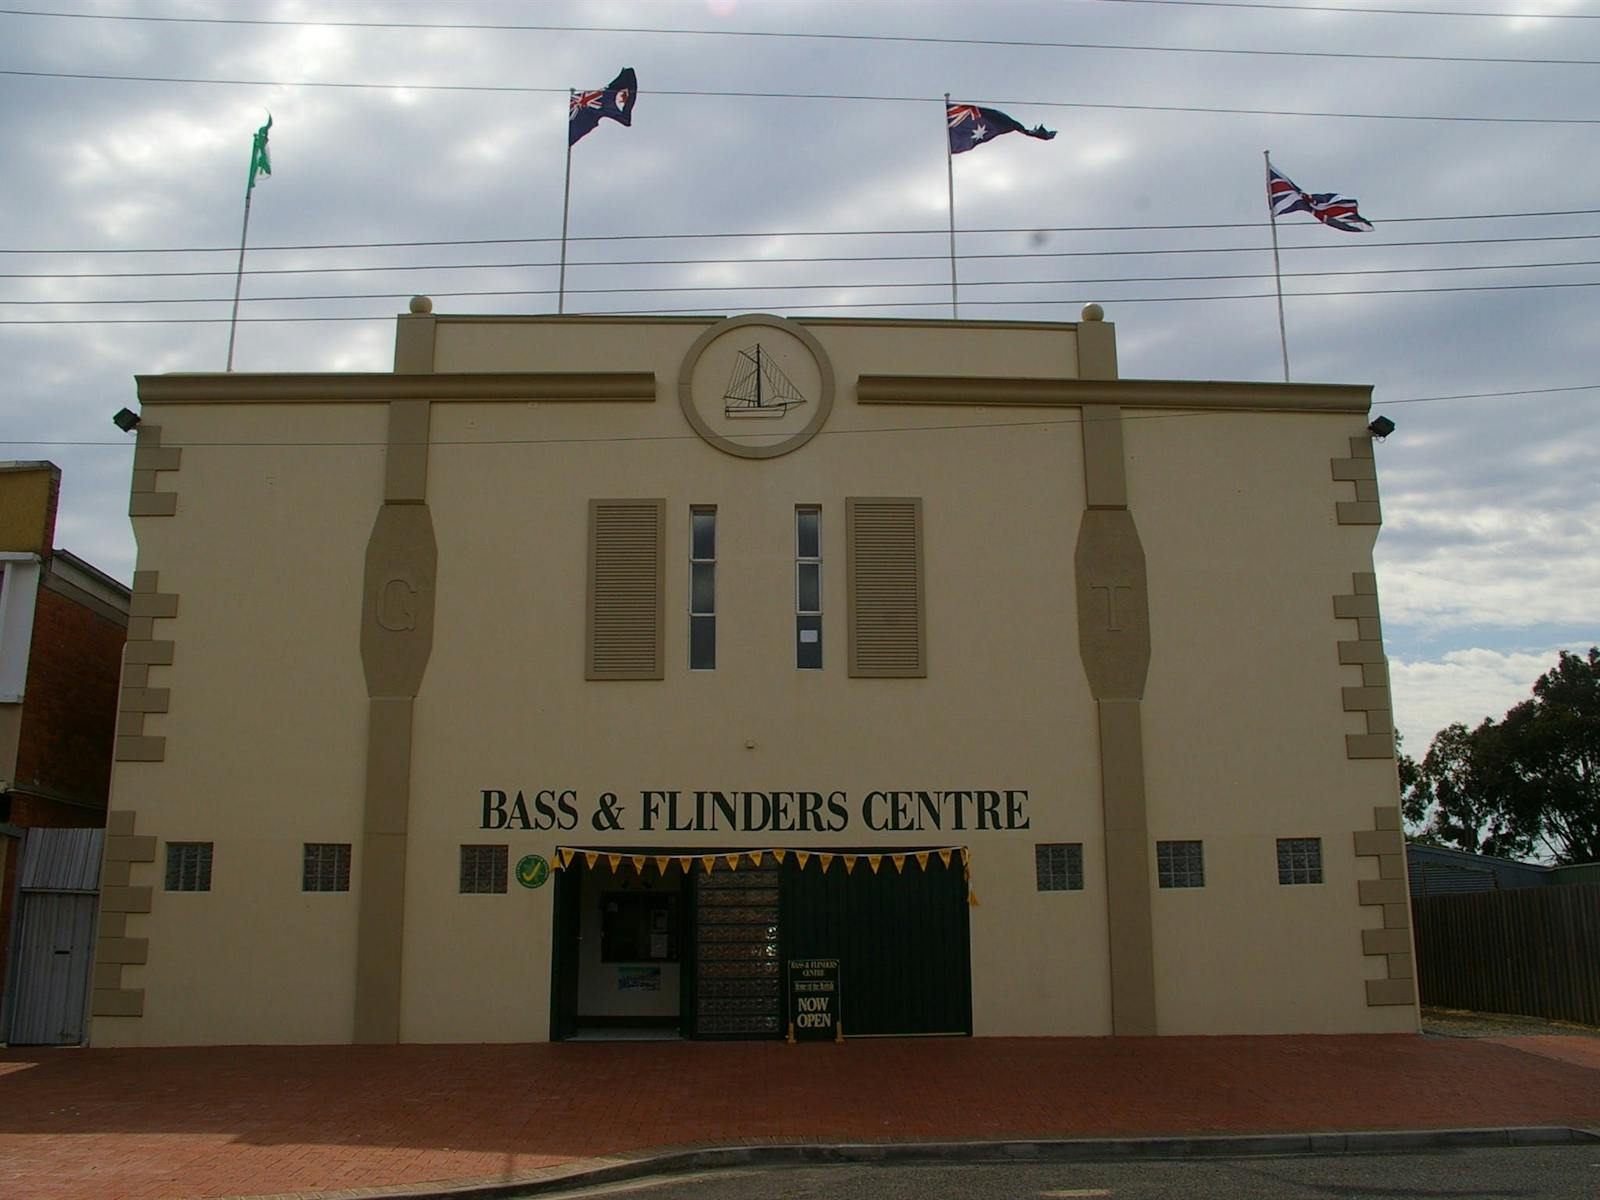 This image is of the Bass and Flinders Centre from outside.